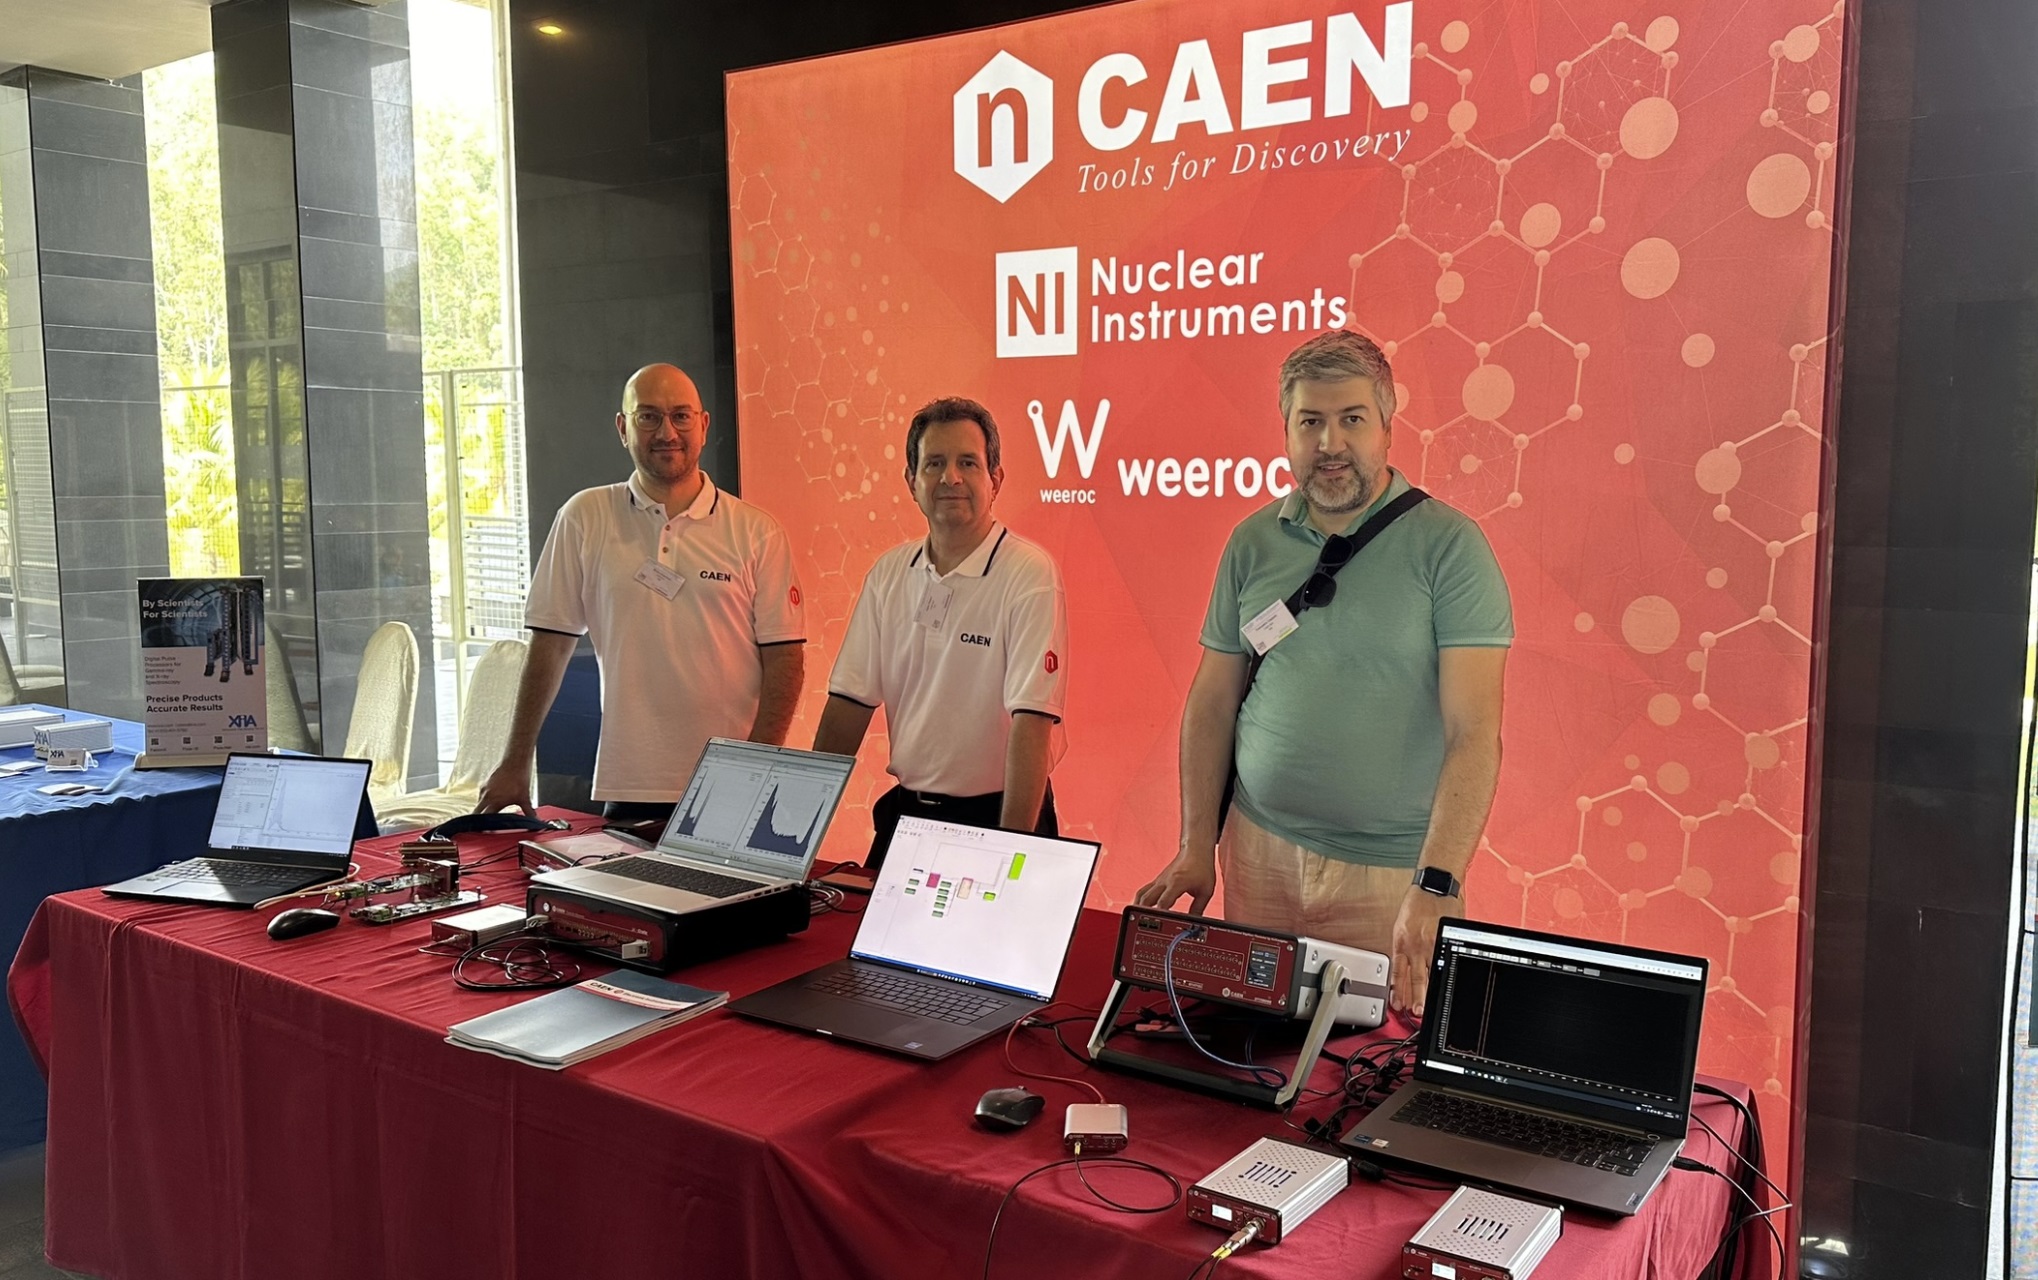 Caen and Nuclear Instruments Booth in Quy Nhon, Vietnam